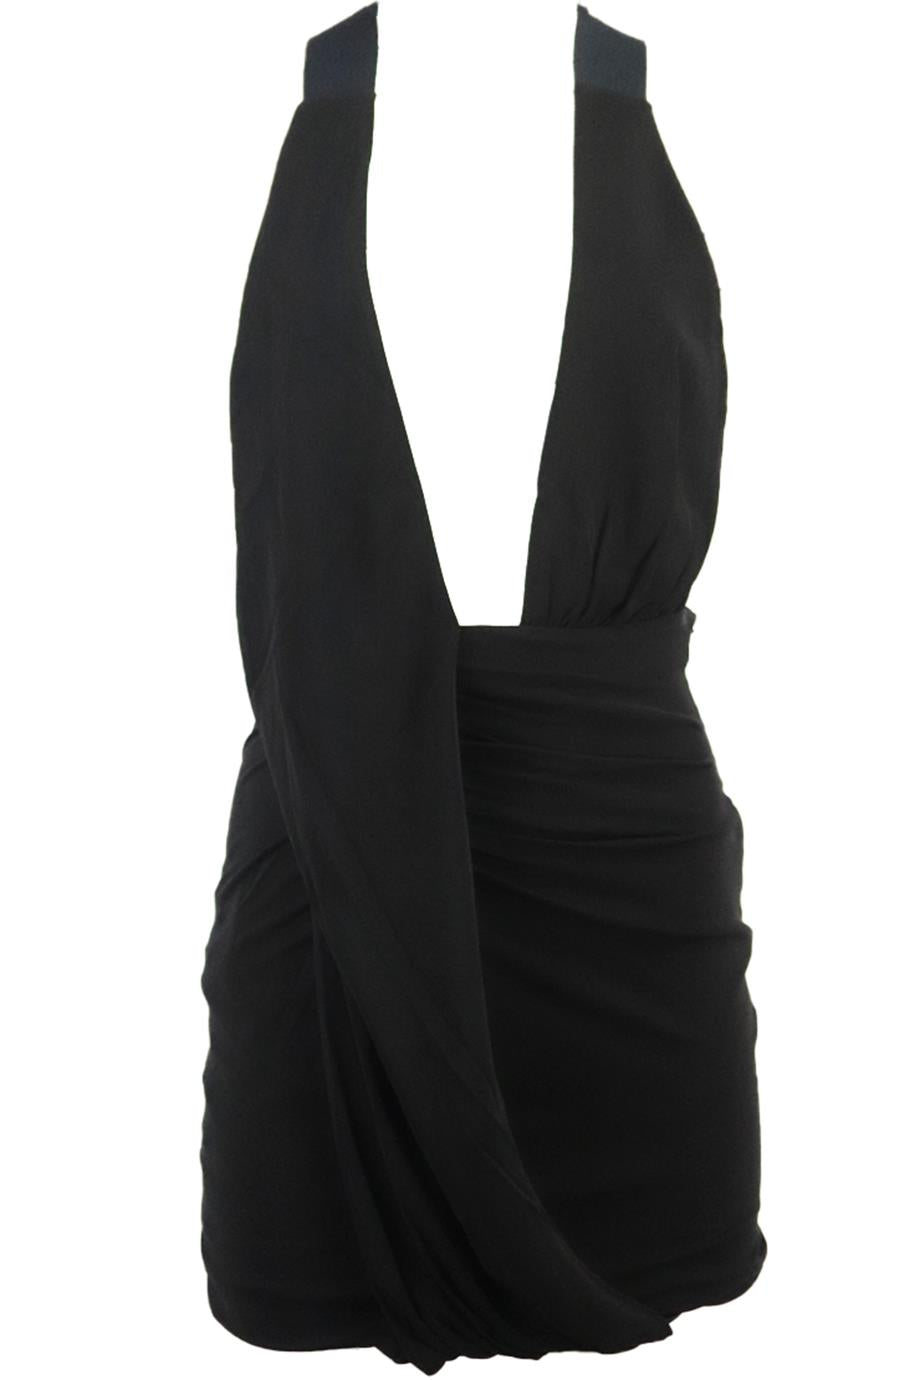 ANTHONY VACCARELLO RUCHED JERSEY MINI DRESS FR 36 UK 8